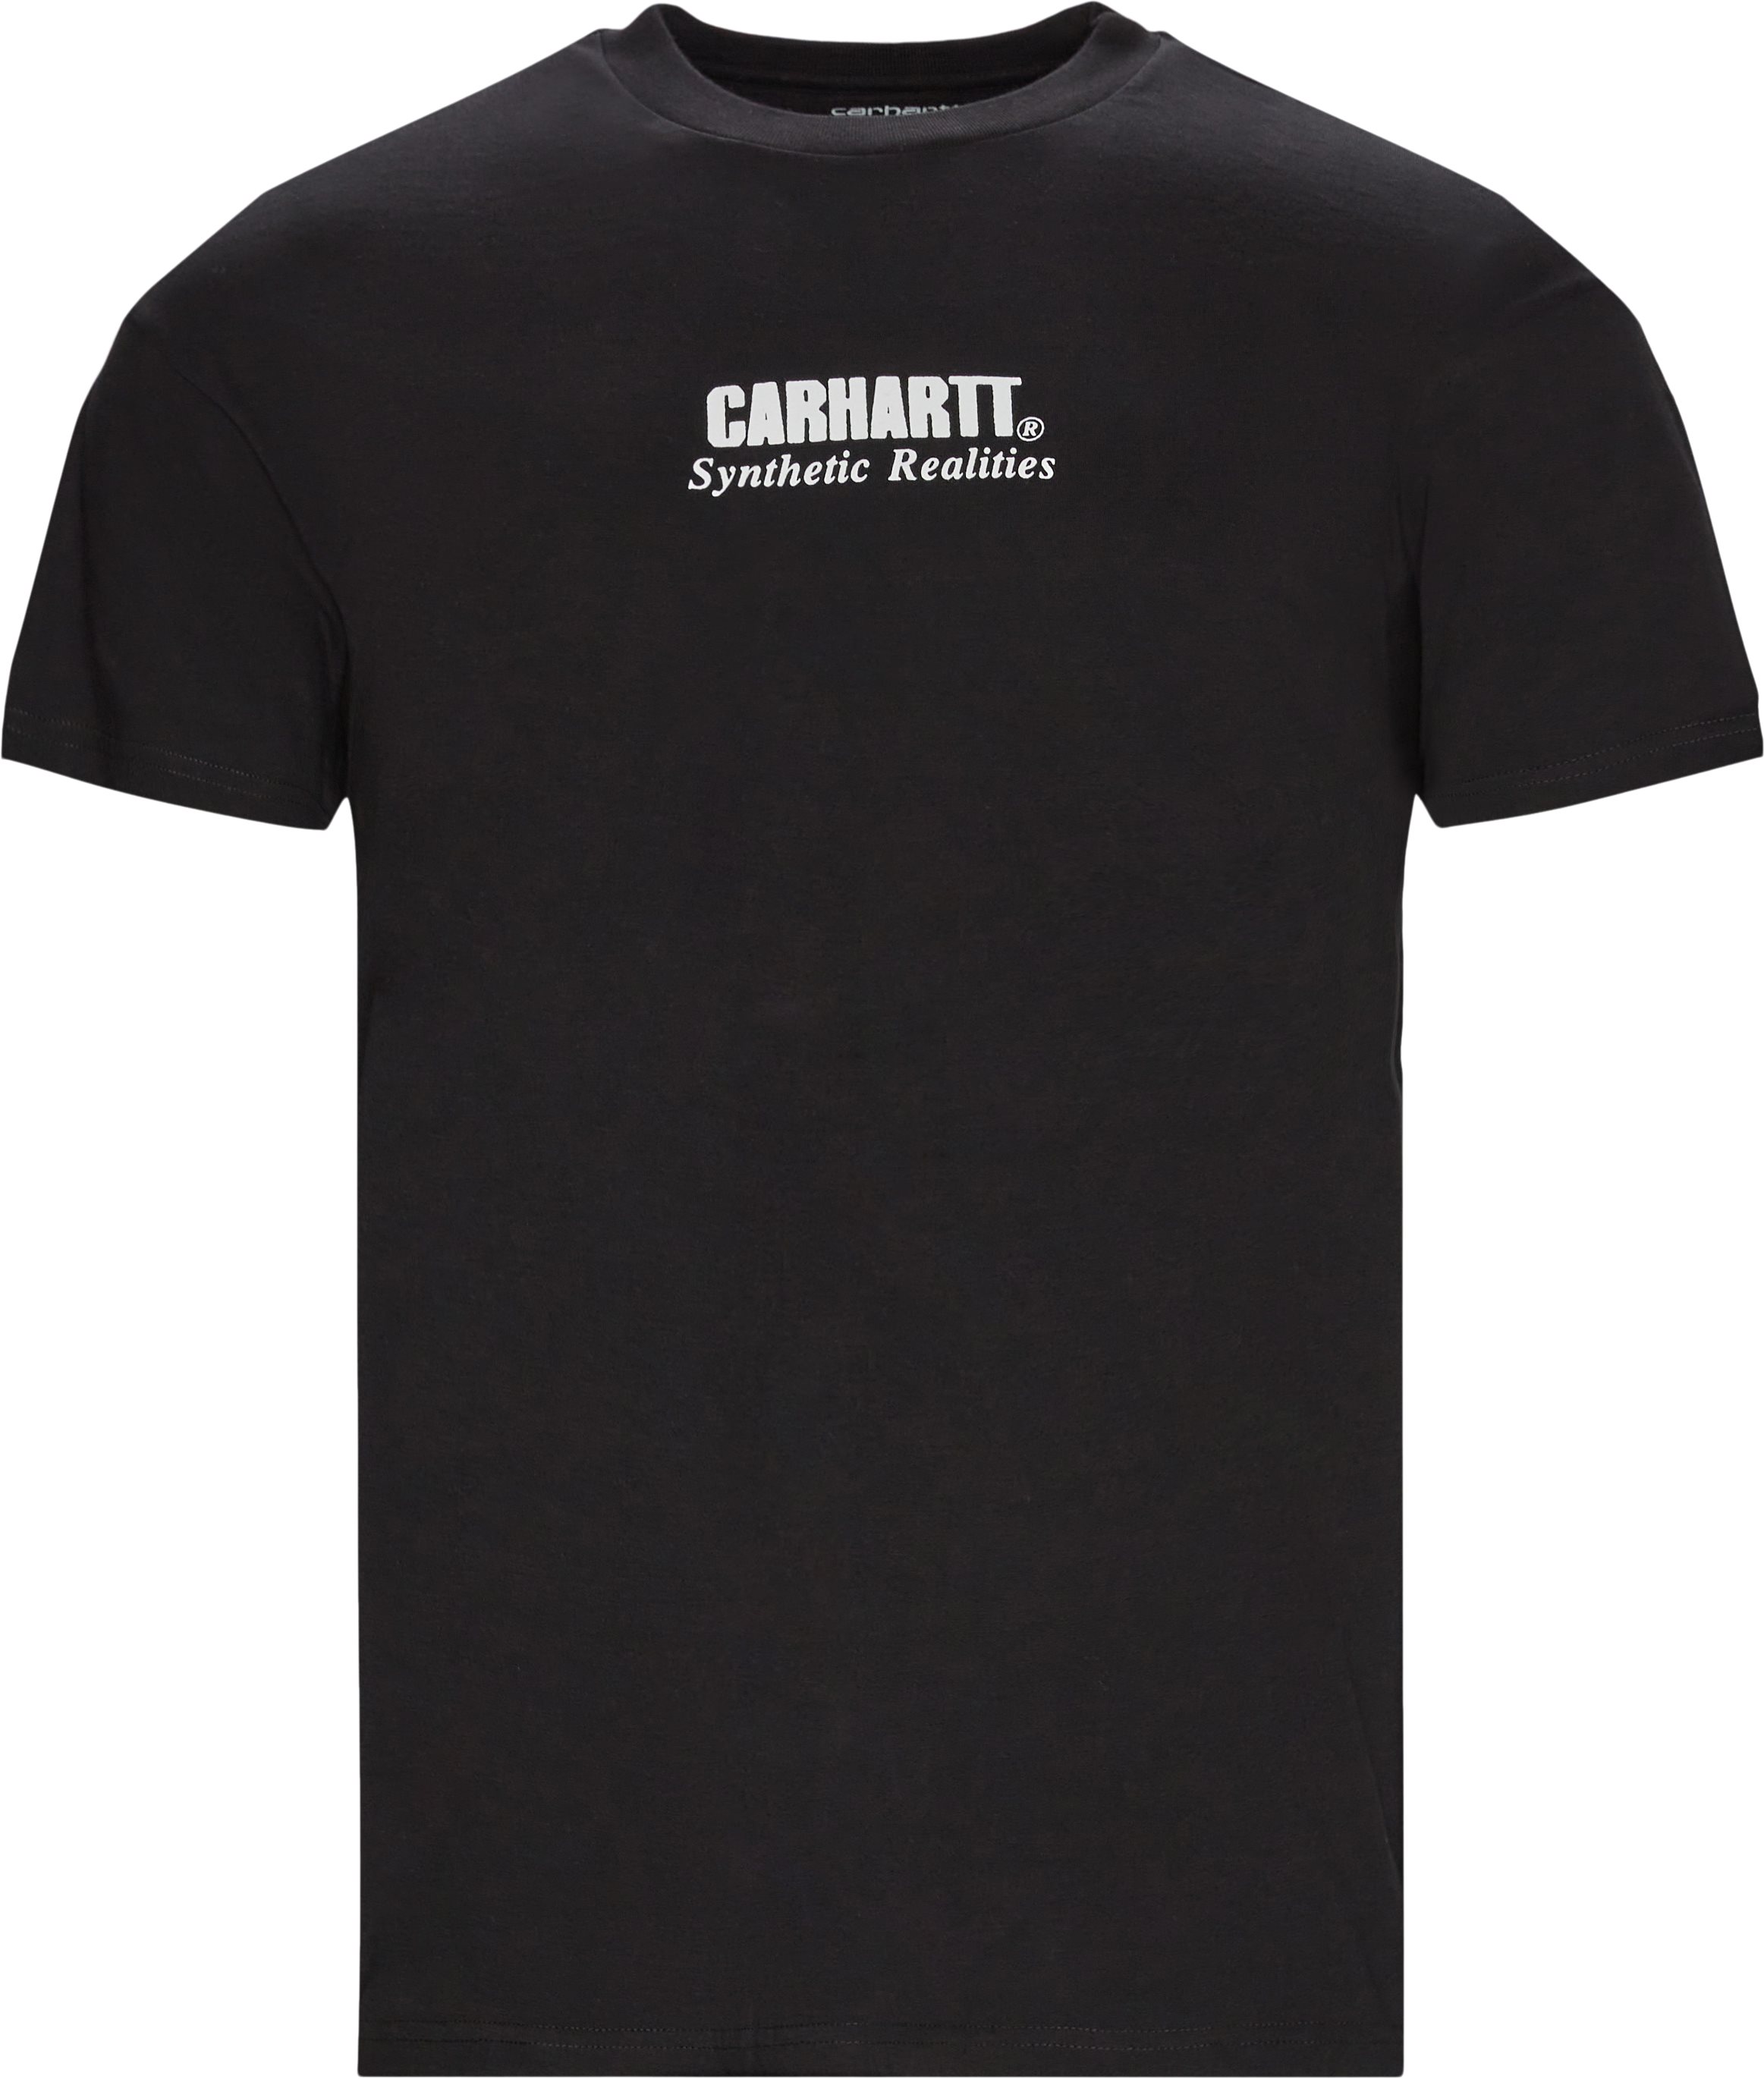 Synthetic Tee - T-shirts - Regular fit - Black